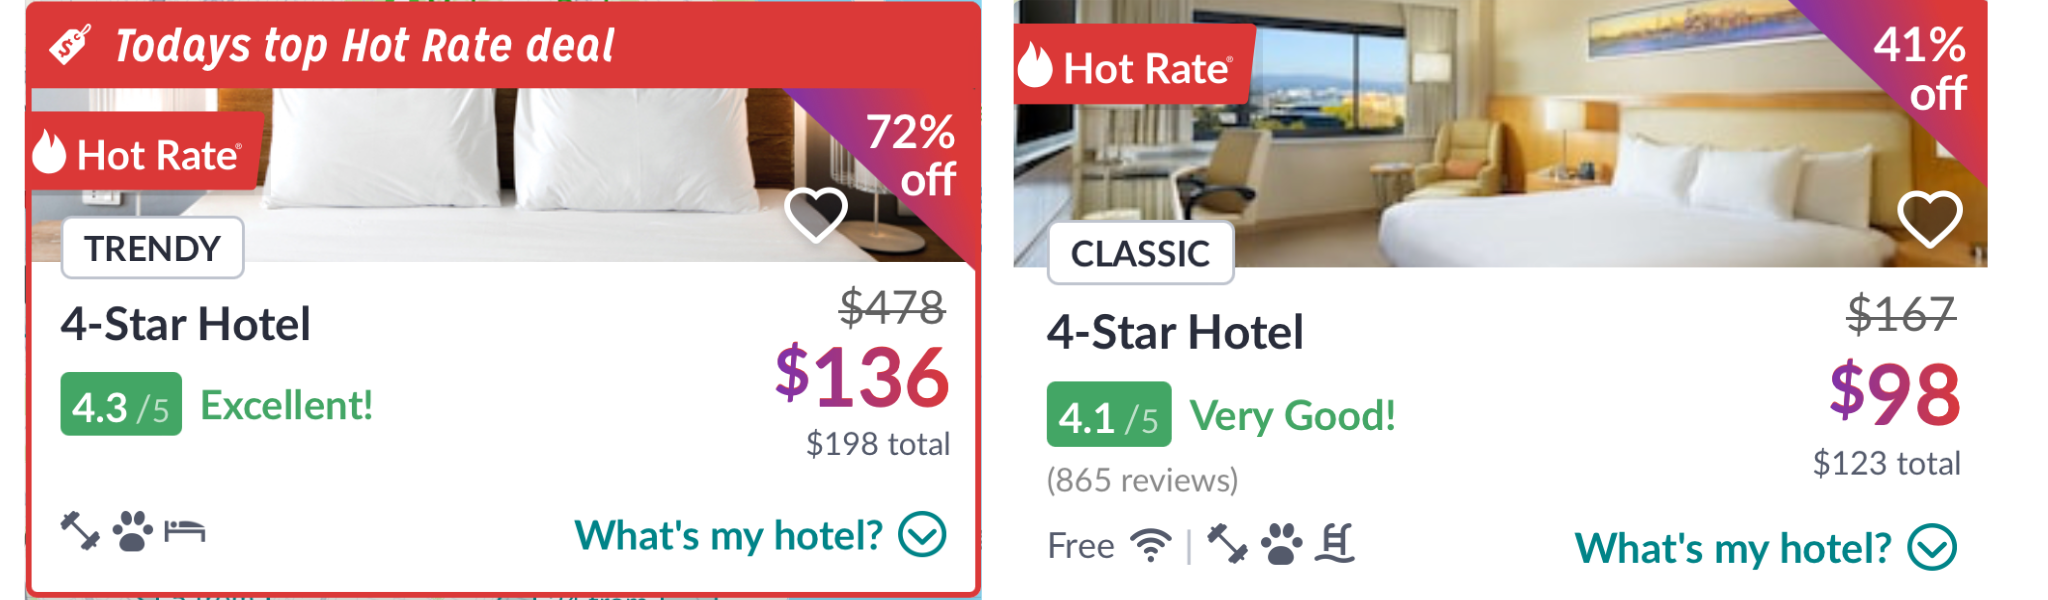 BEST Hotel Prices: #1 Hack (Try Now!)